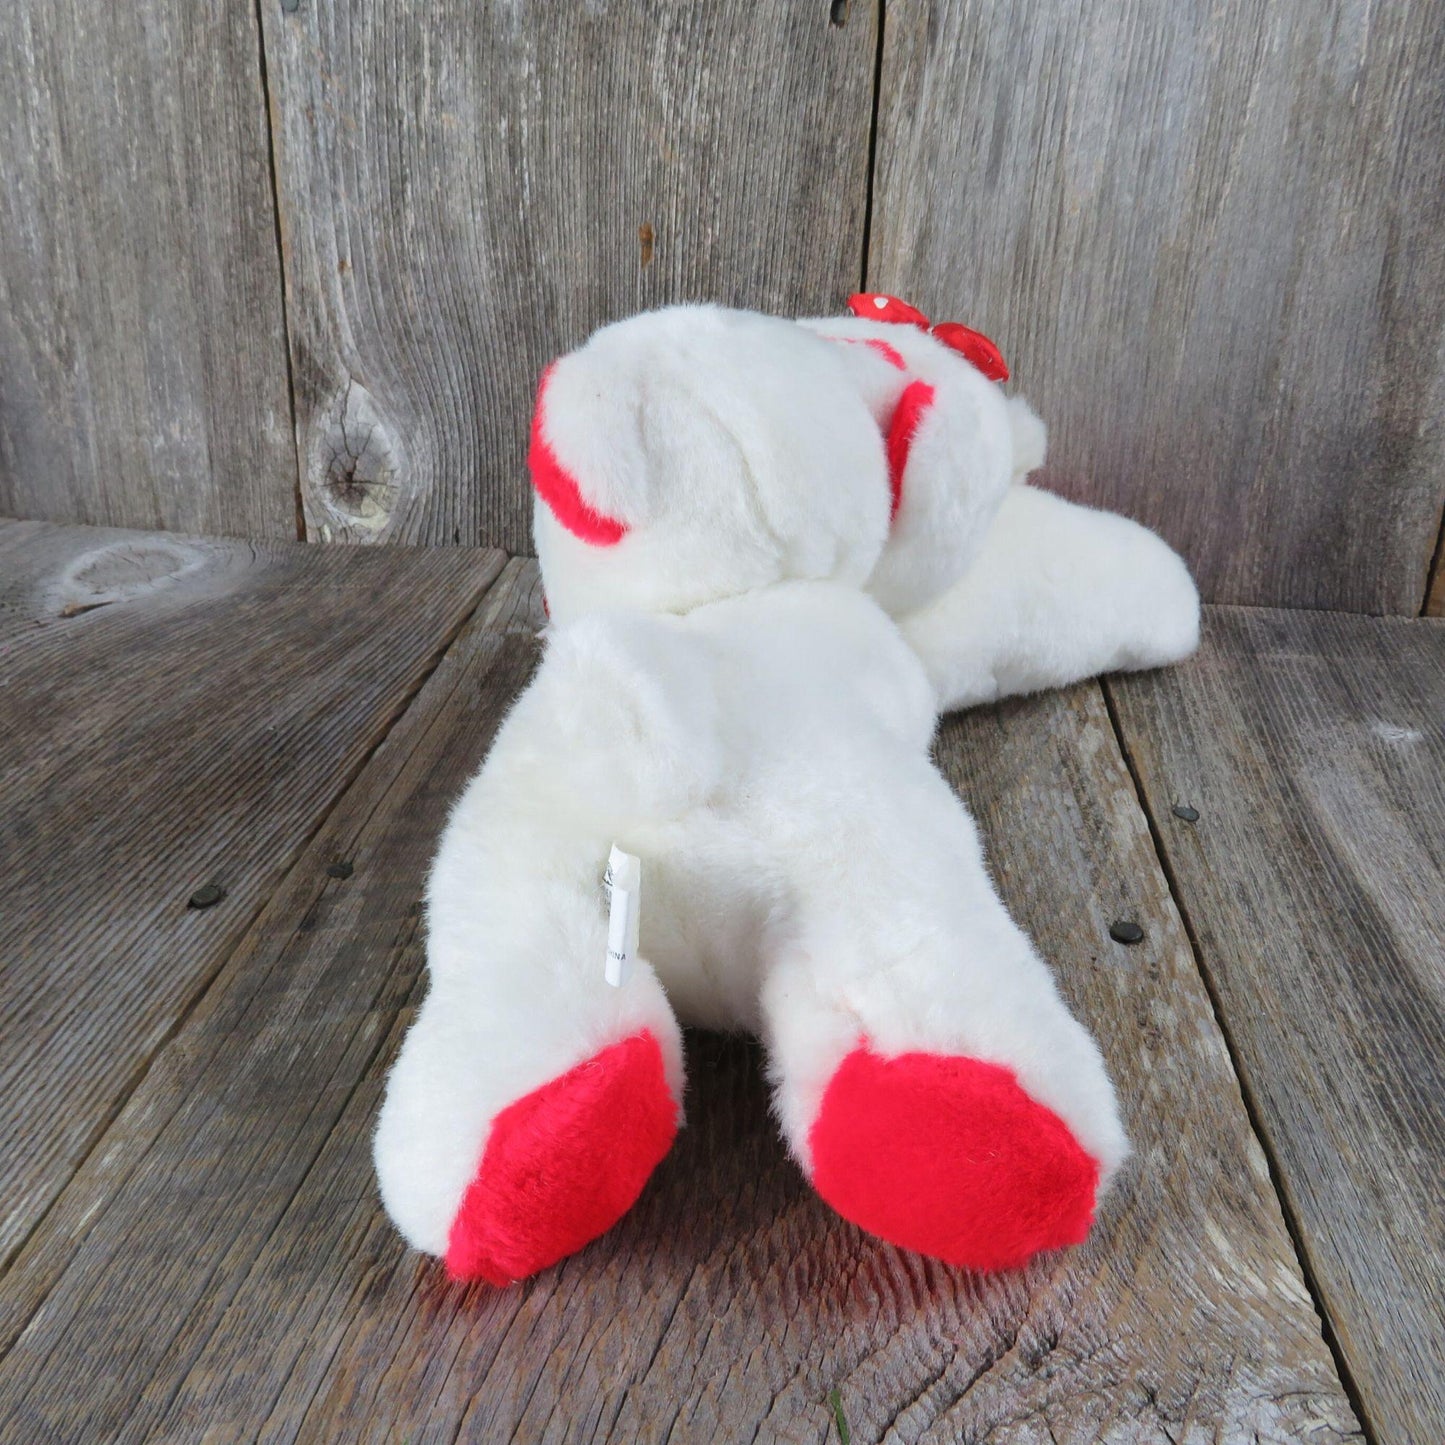 Vintage White Hugging Bears Plush I Love You Heart Red Flocked Nose Oriental Trading Company Stuffed Animal Valentines